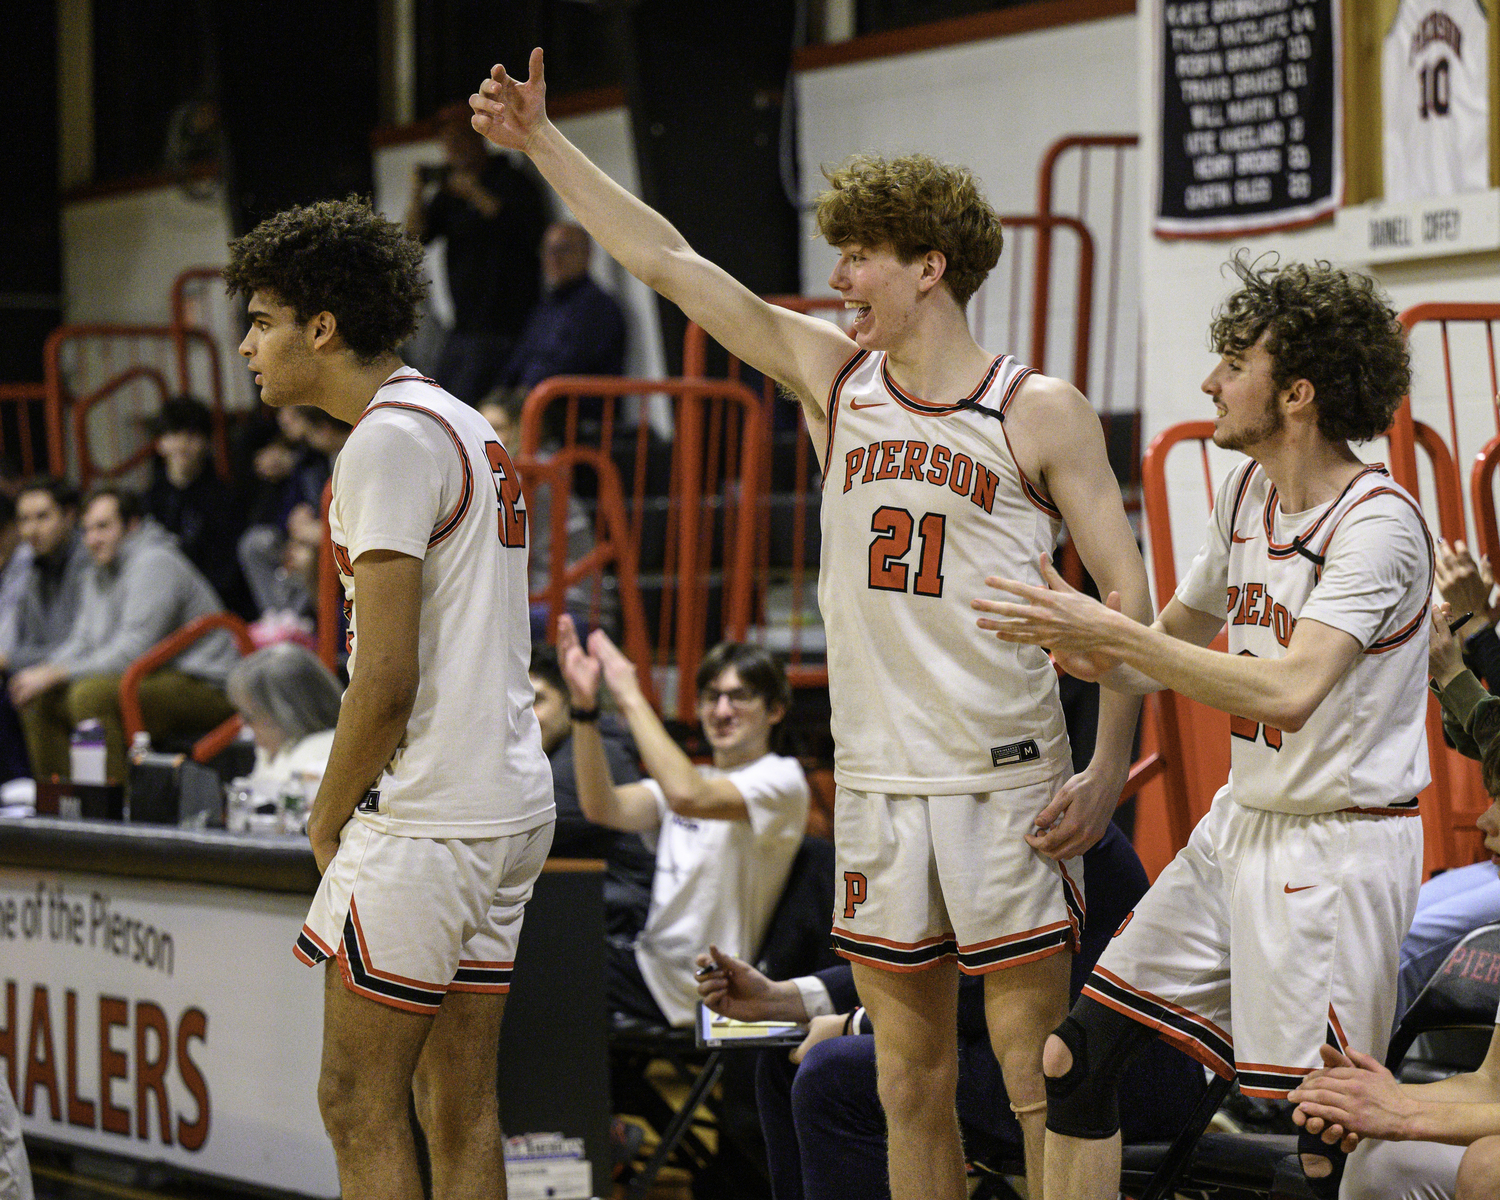 The Whalers celebrate another basket in their victory over Shoreham on Friday night.   MARIANNE BARNETT